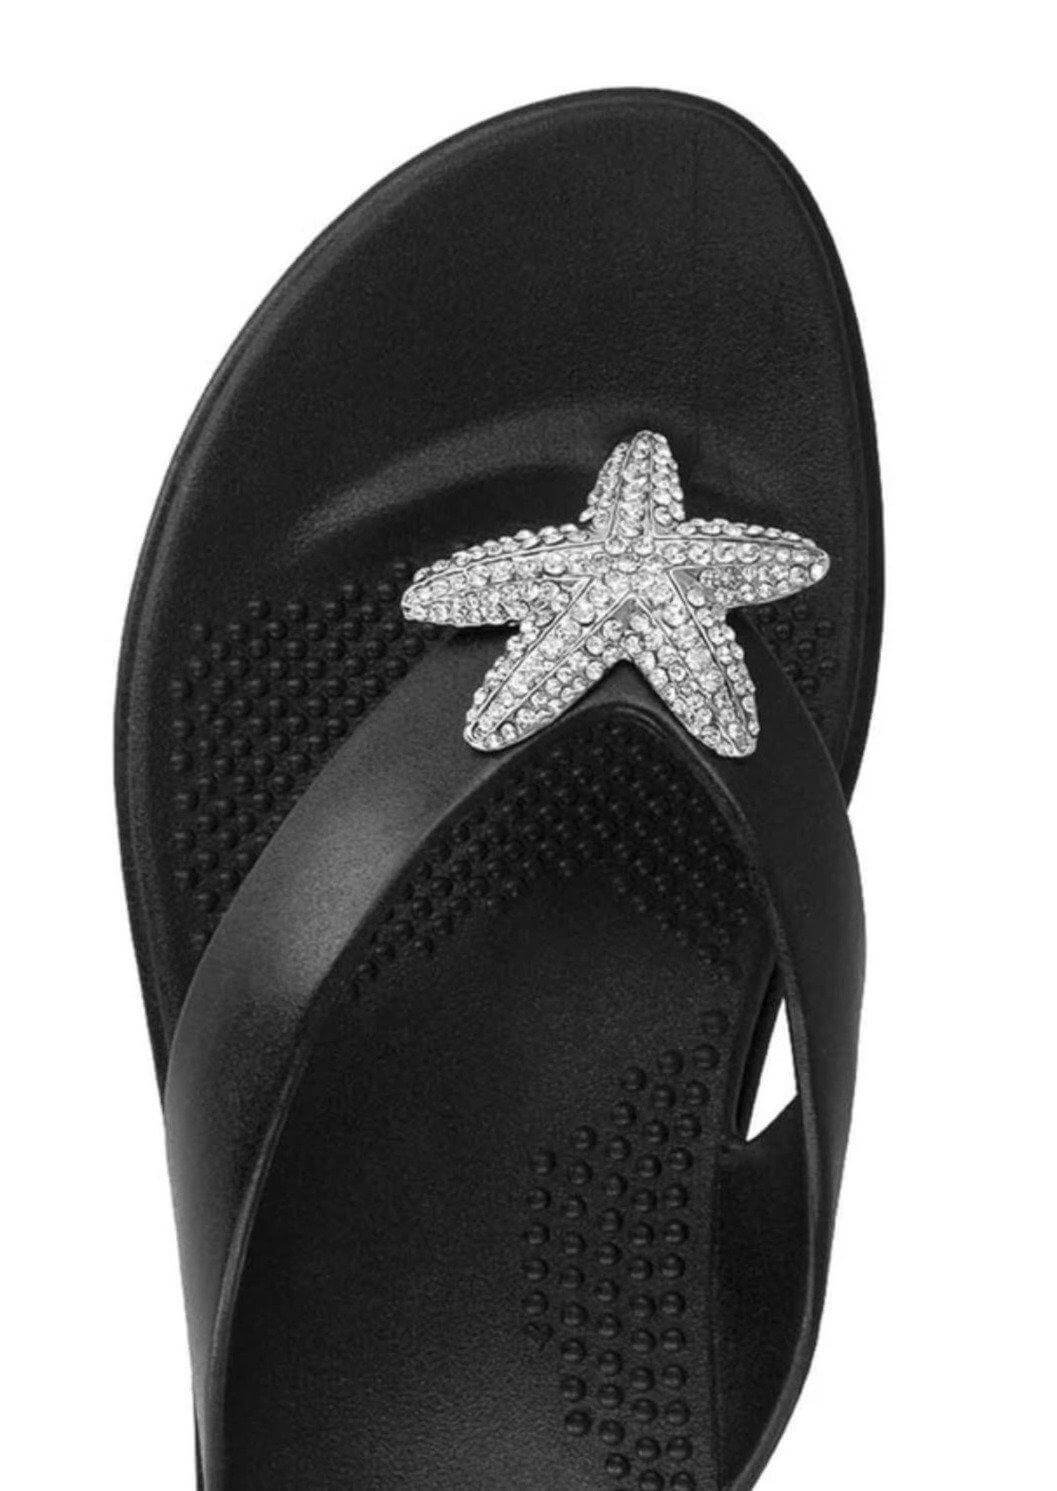 Brand: Oka-B - Oka-B Oliver Star Fish Bling Black Flip Flops -  beach, Beach Wear, Black, Bling, Featured, Flip Flops, Flower, Made in America, made in usa, Oliver, Sandal, Sandals, Shoes, Shoes made local, Spring, Star Fish, Summer, Women - Classy Cozy Cool Boutique